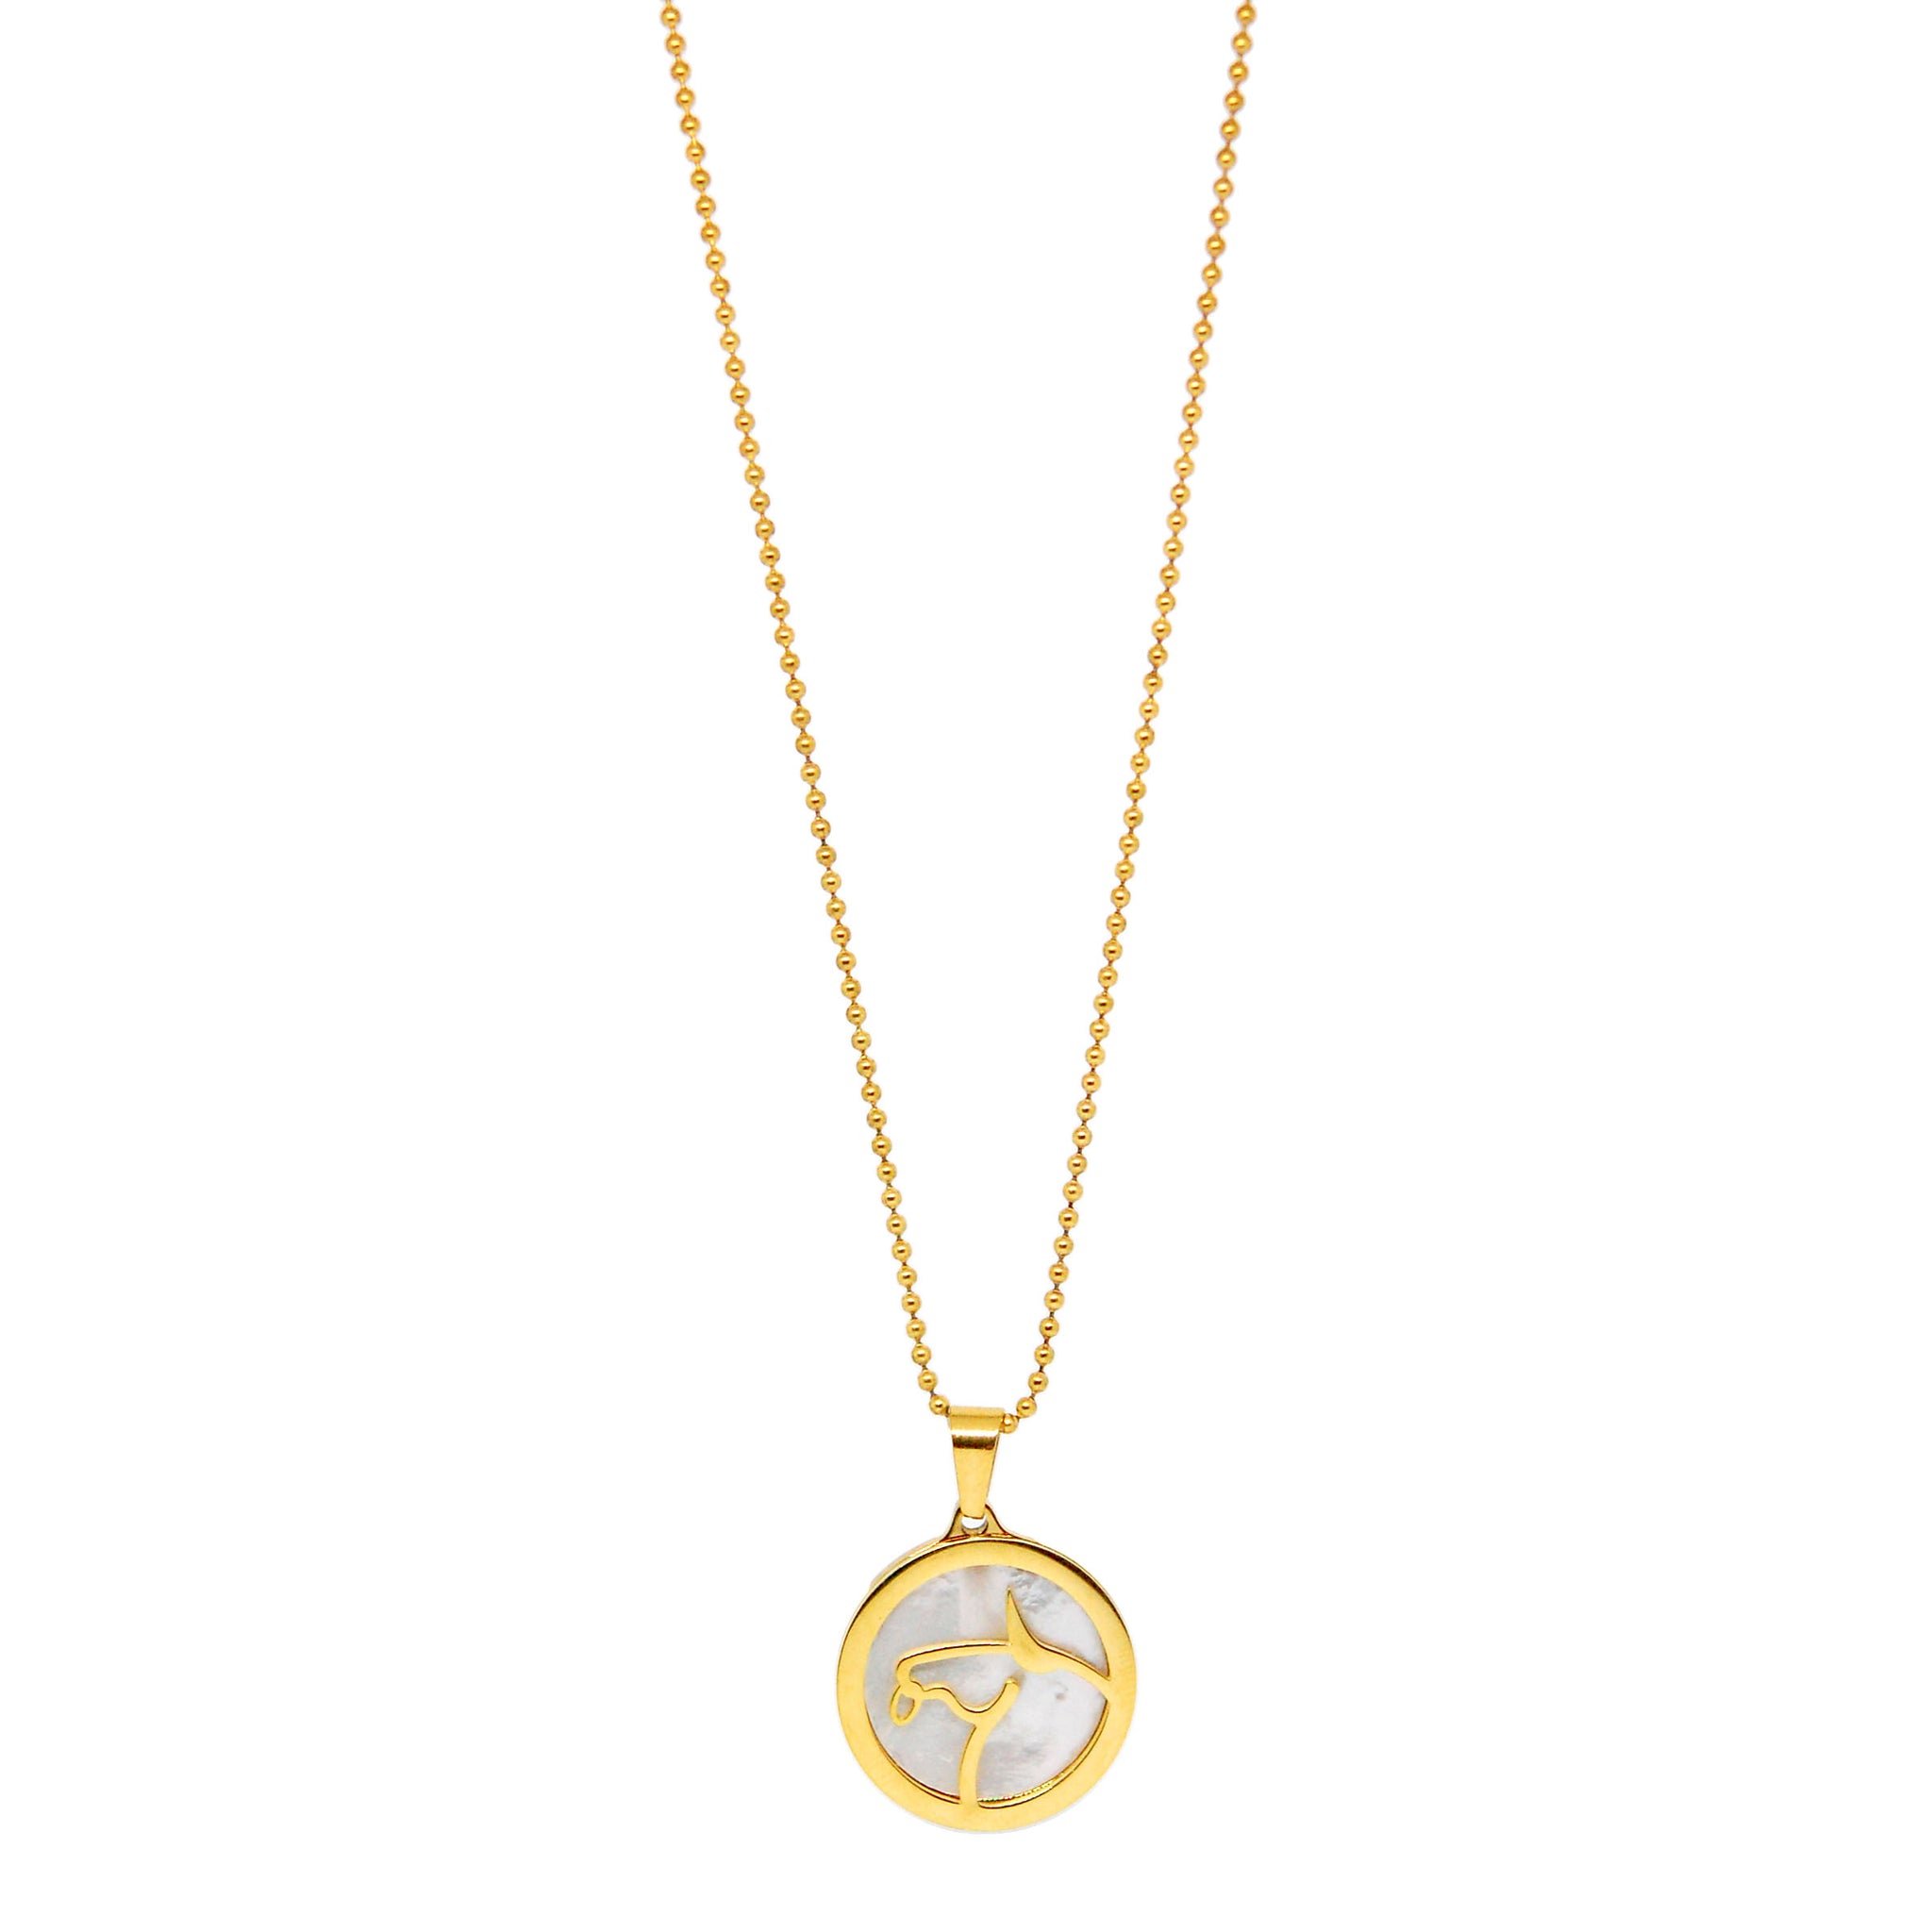 ESN 7962: All IPG Mop Taurus Zodiac Necklace w/ 18" IPG Ball Chain